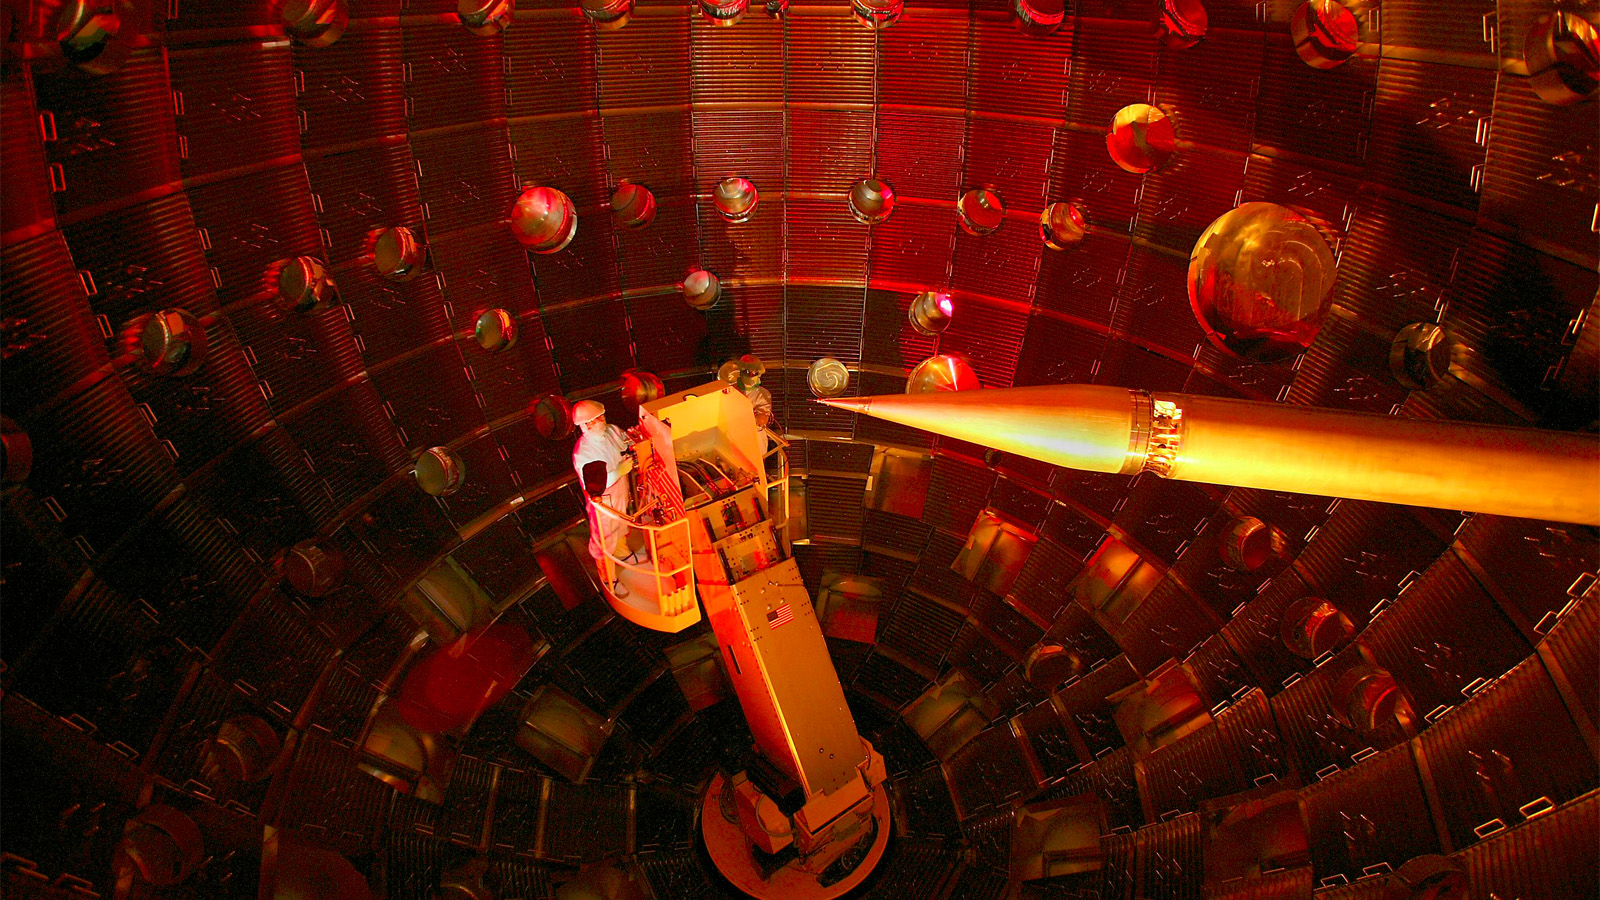 14 Immense Scientific Instruments You Won’t Believe Are Real